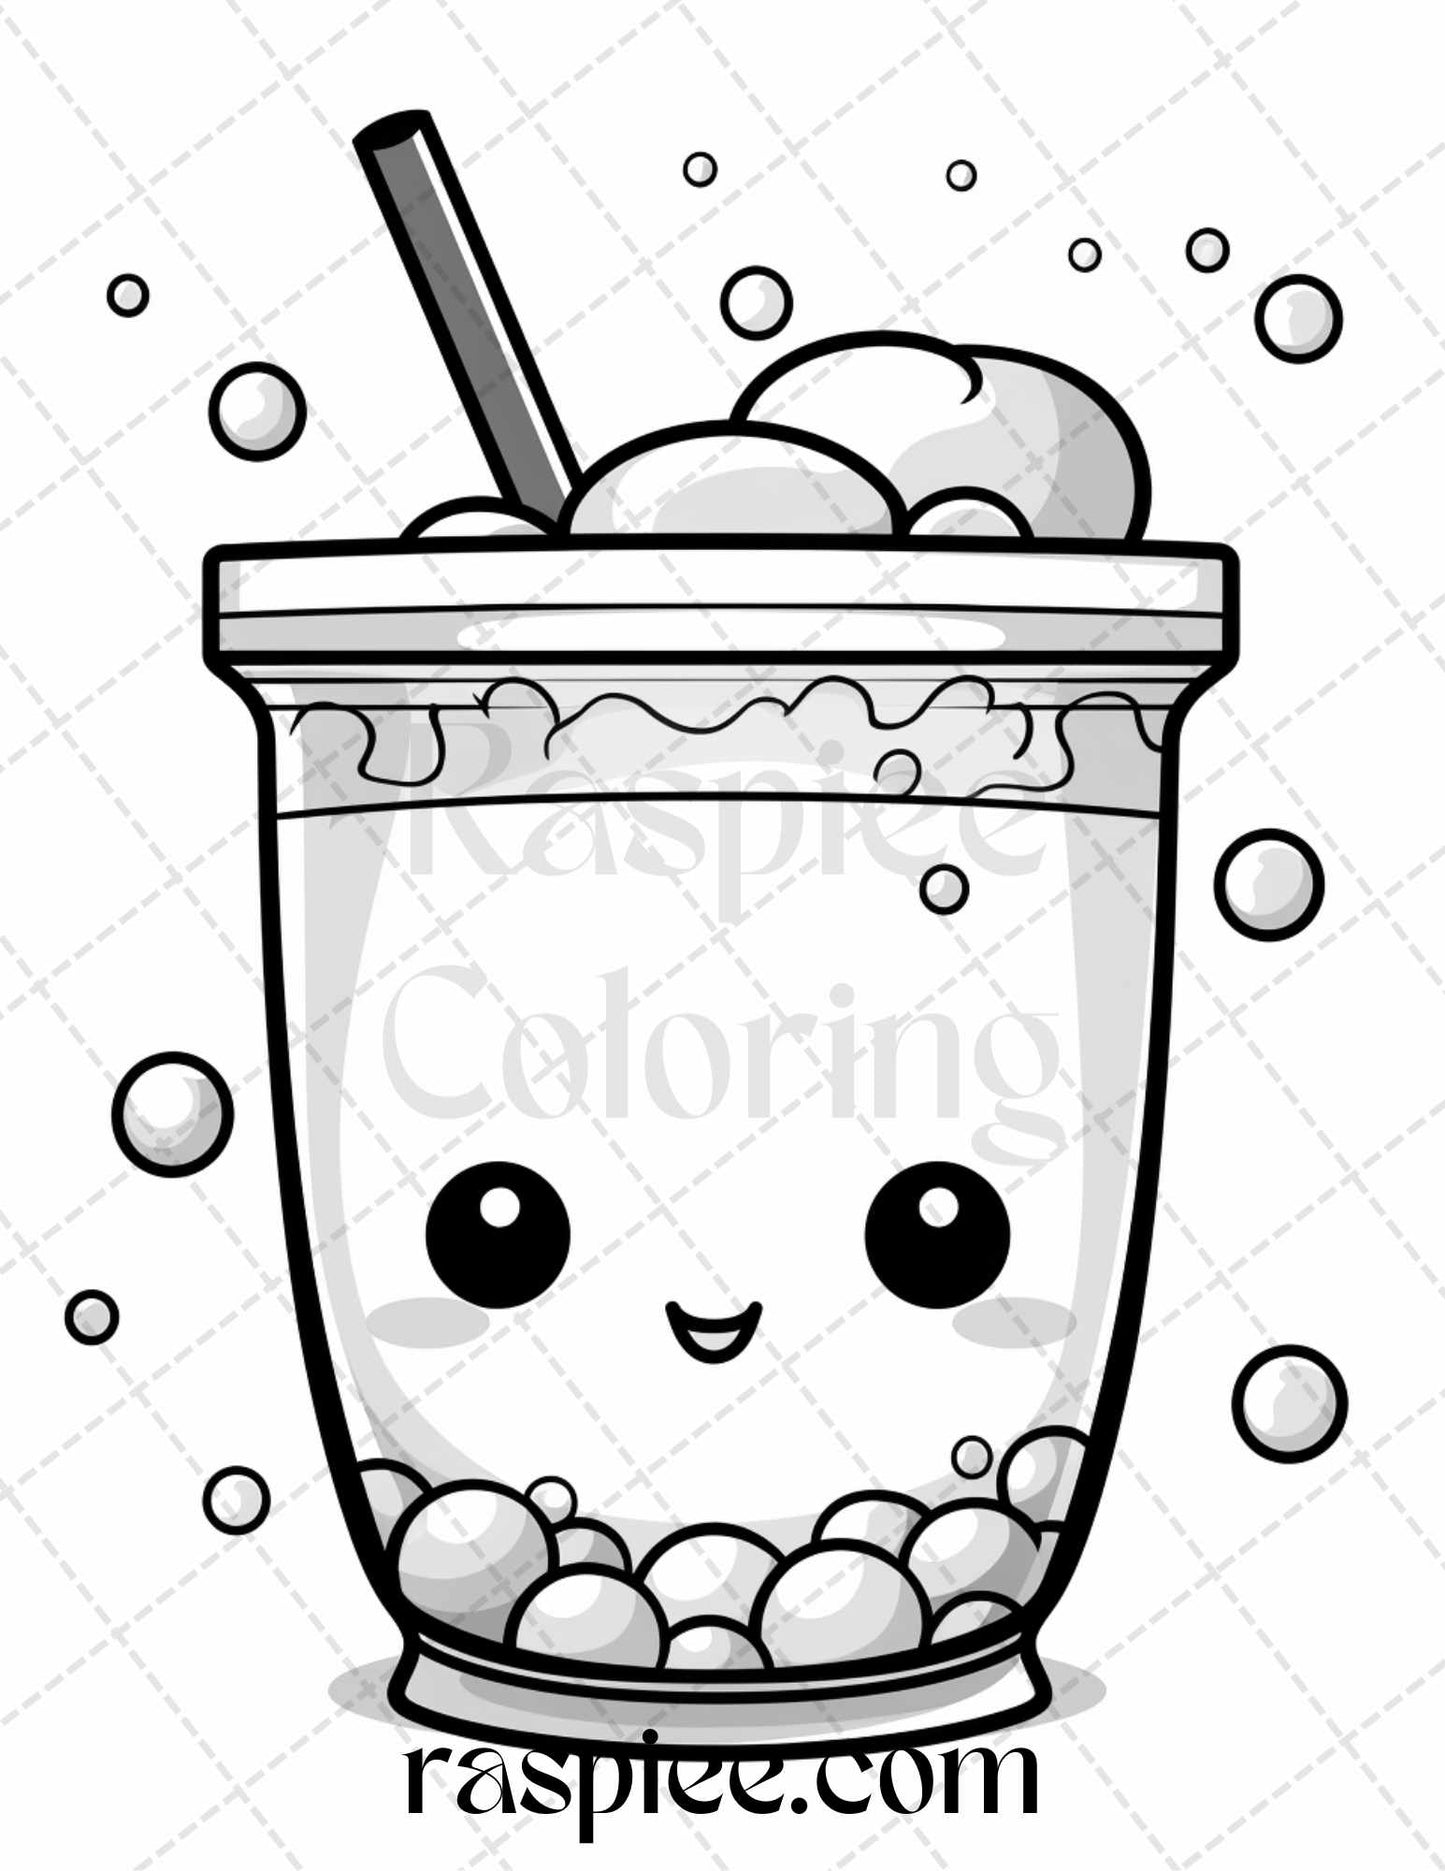 Kawaii Boba Tea Coloring Page, Printable Grayscale Coloring Illustration, Cute Boba Drink Art for Adults and Kids, Relaxing Coloring Sheet Activity, DIY Coloring Book Page, Instant Download Printable, Stress-Relief Coloring Picture, Beverage Doodles for Coloring, Family-Friendly Coloring Activity